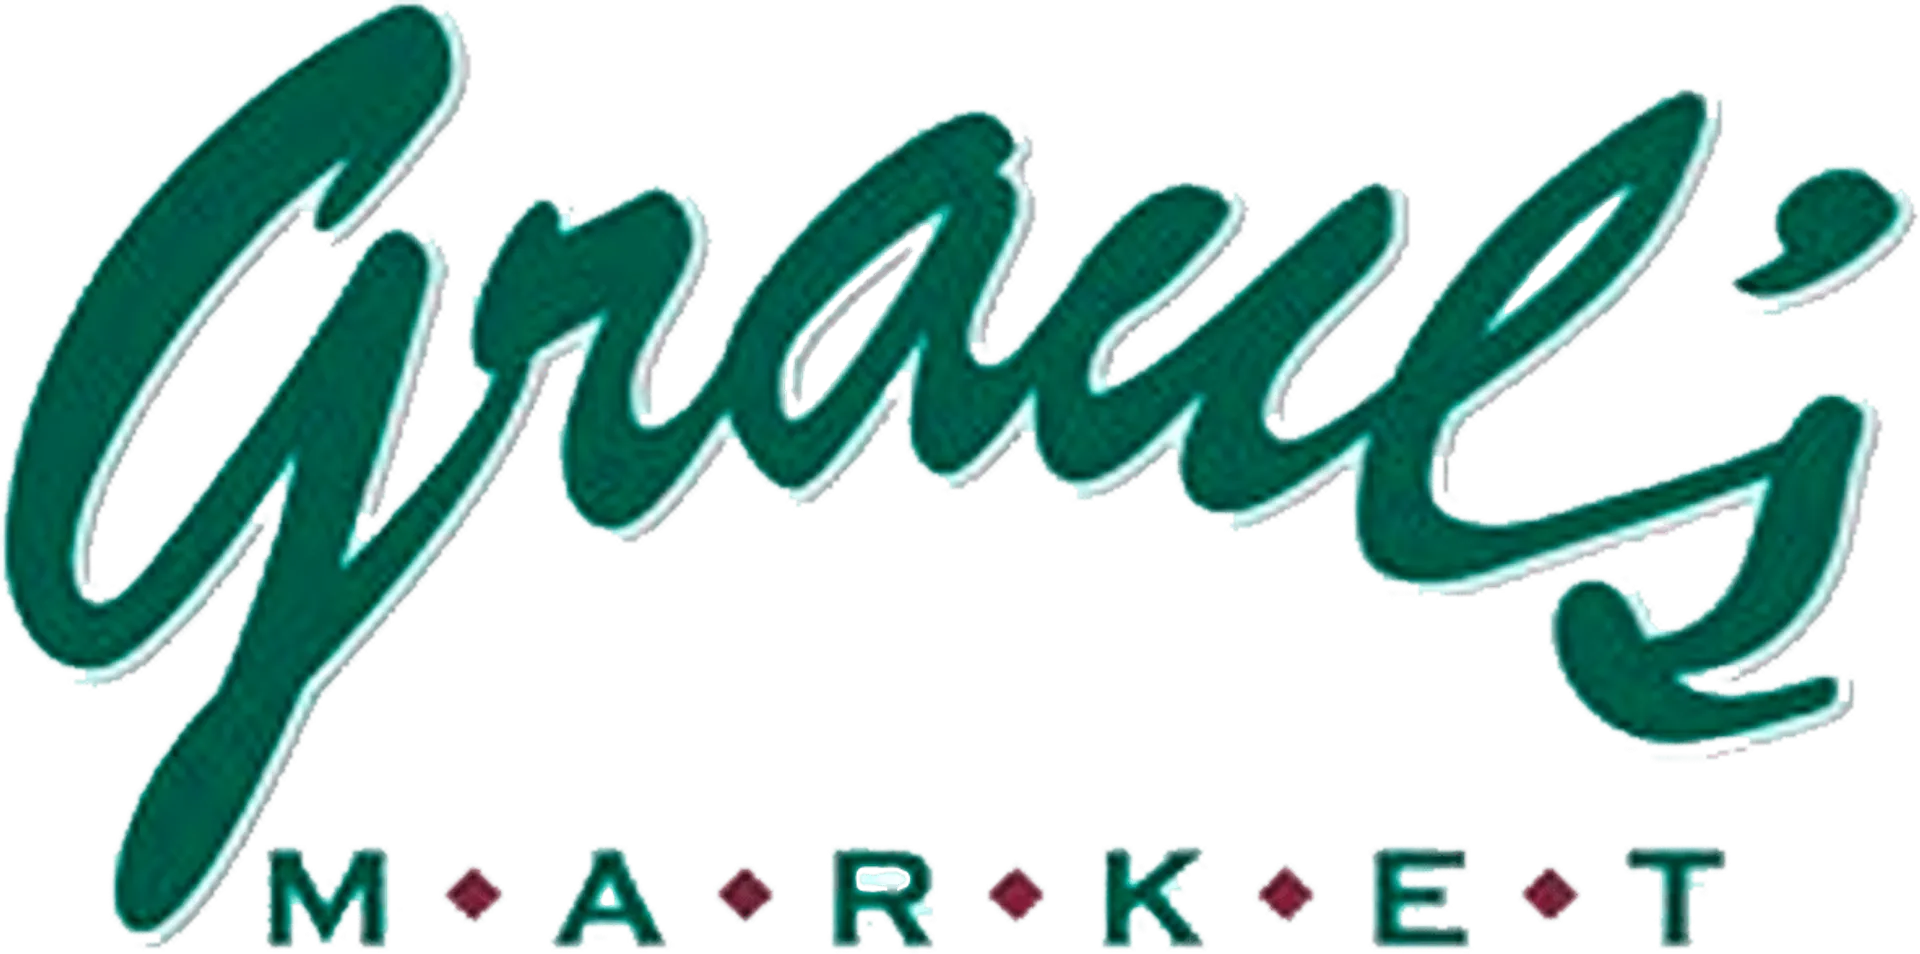 GRAUL´S MARKET logo current weekly ad